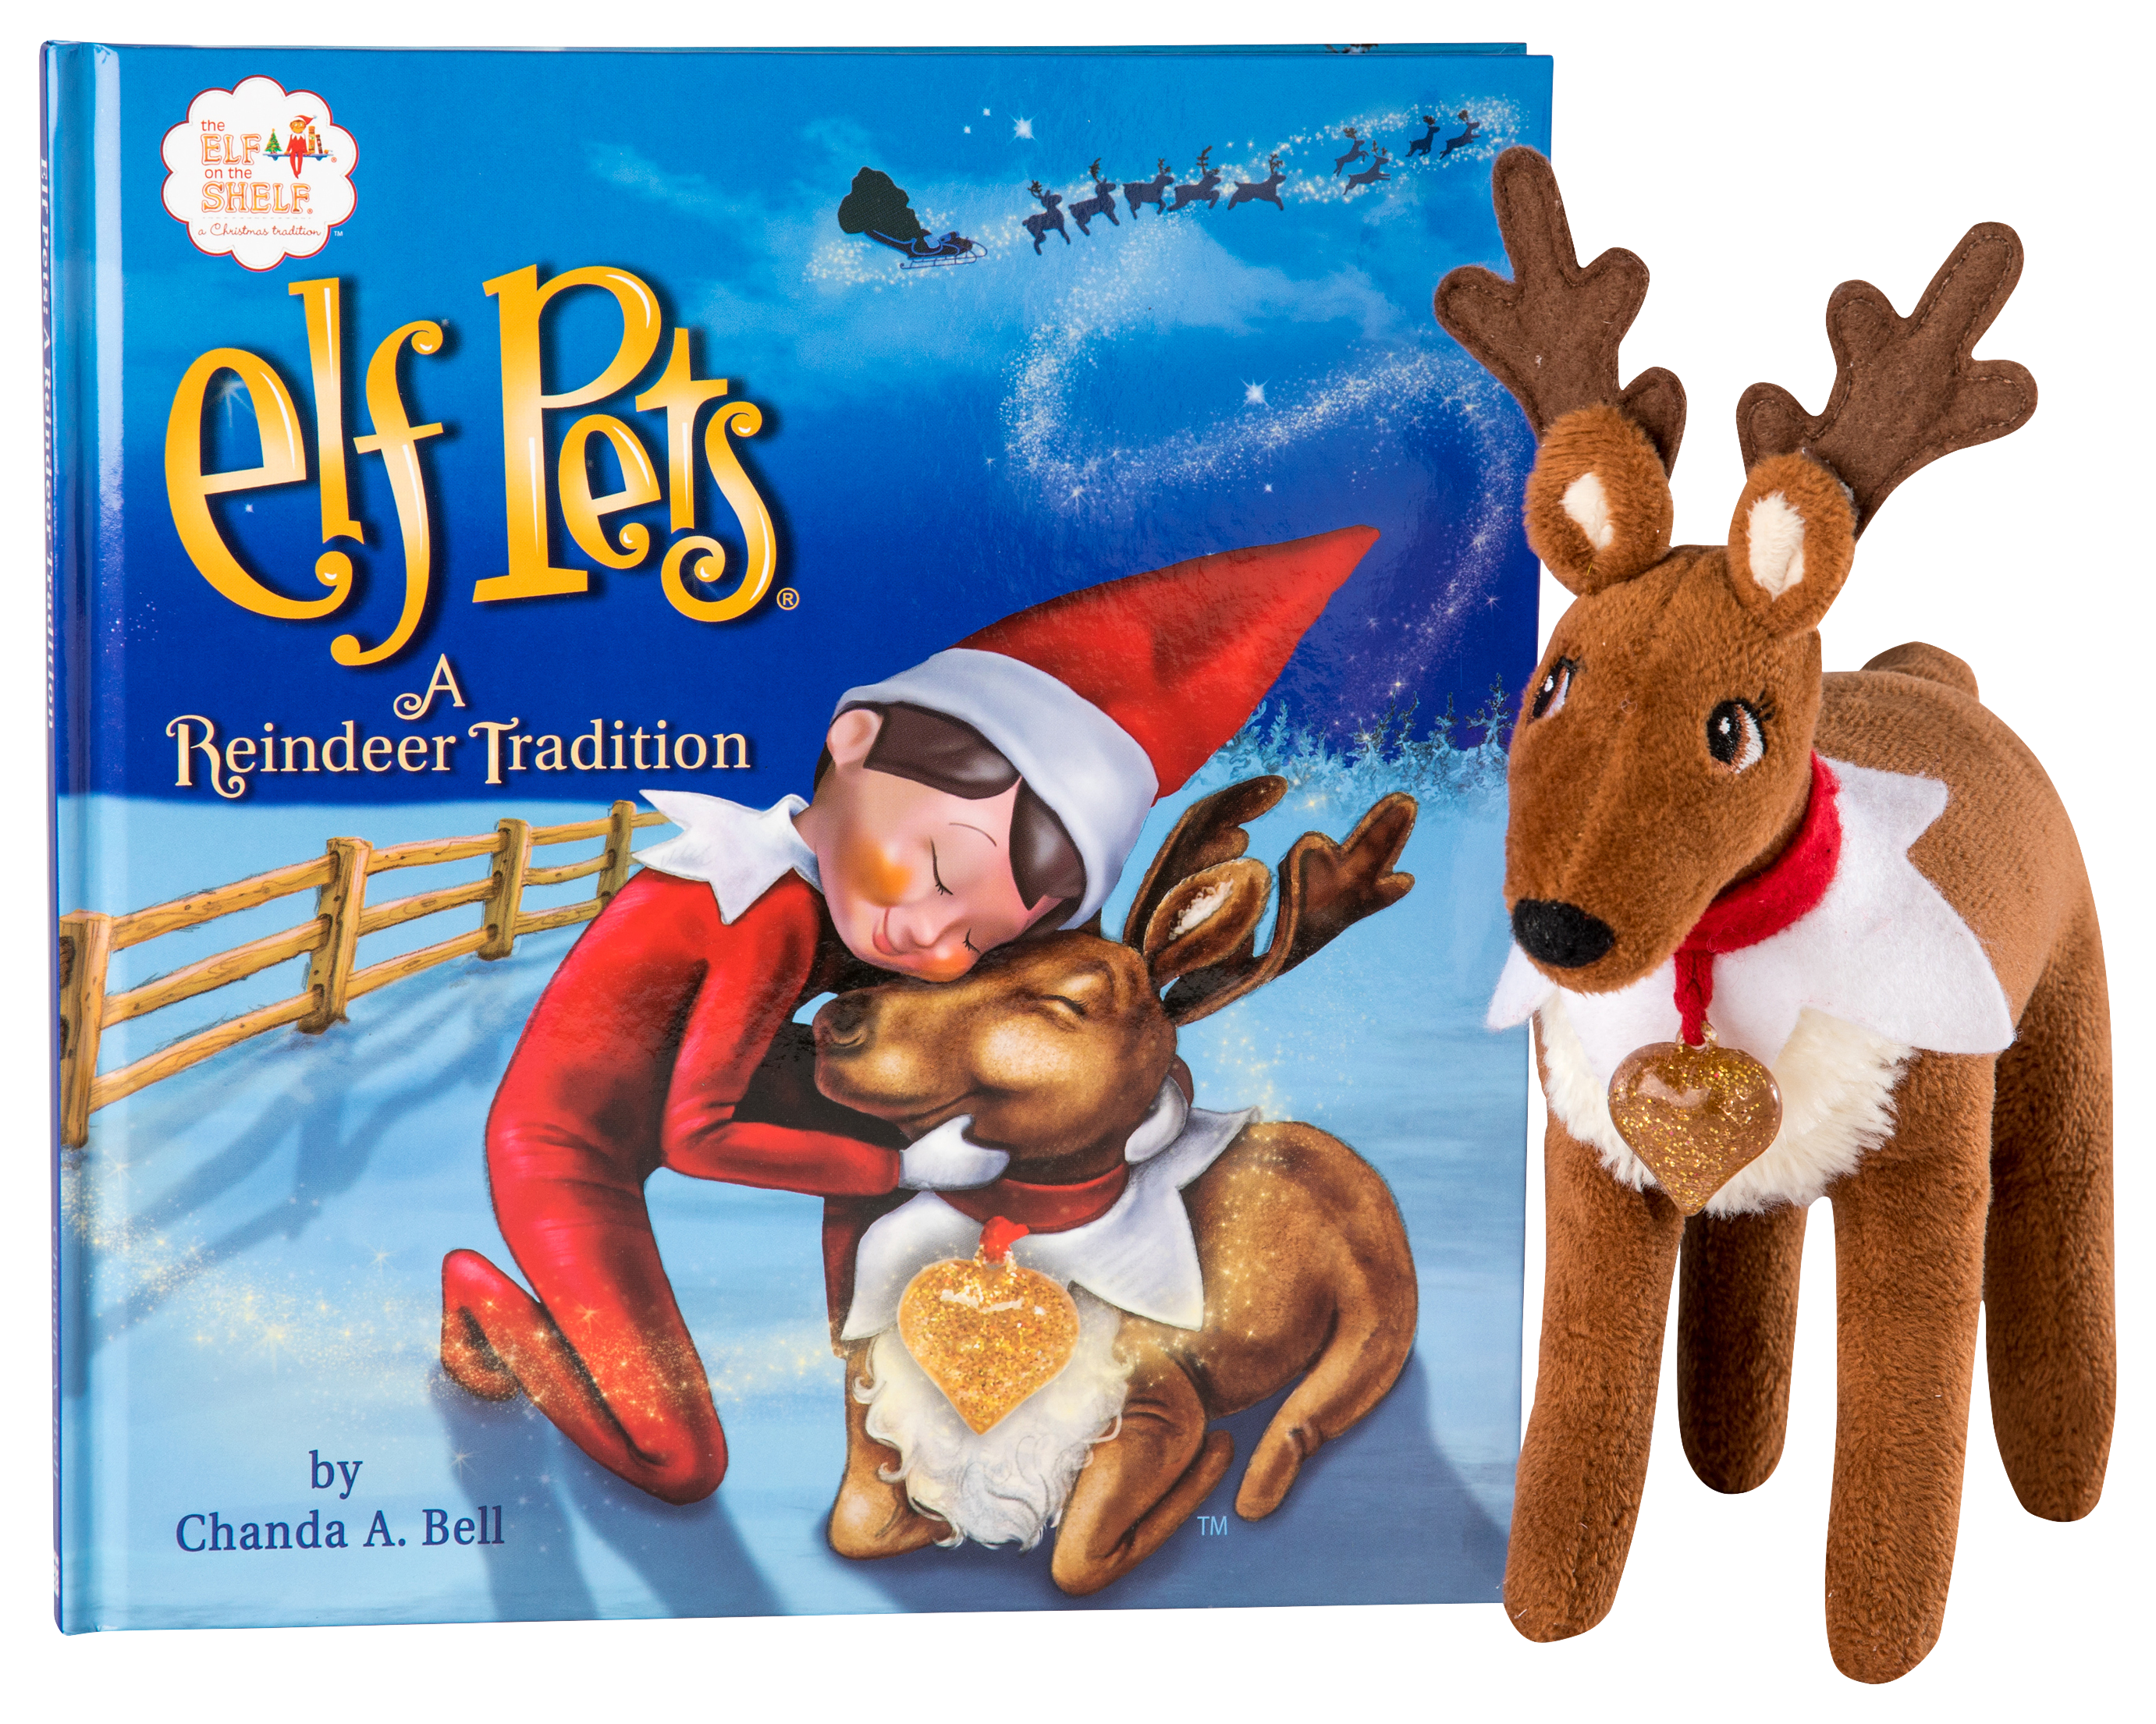 The Elf on the Shelf and Elf Pets - The Elf on the Shelf